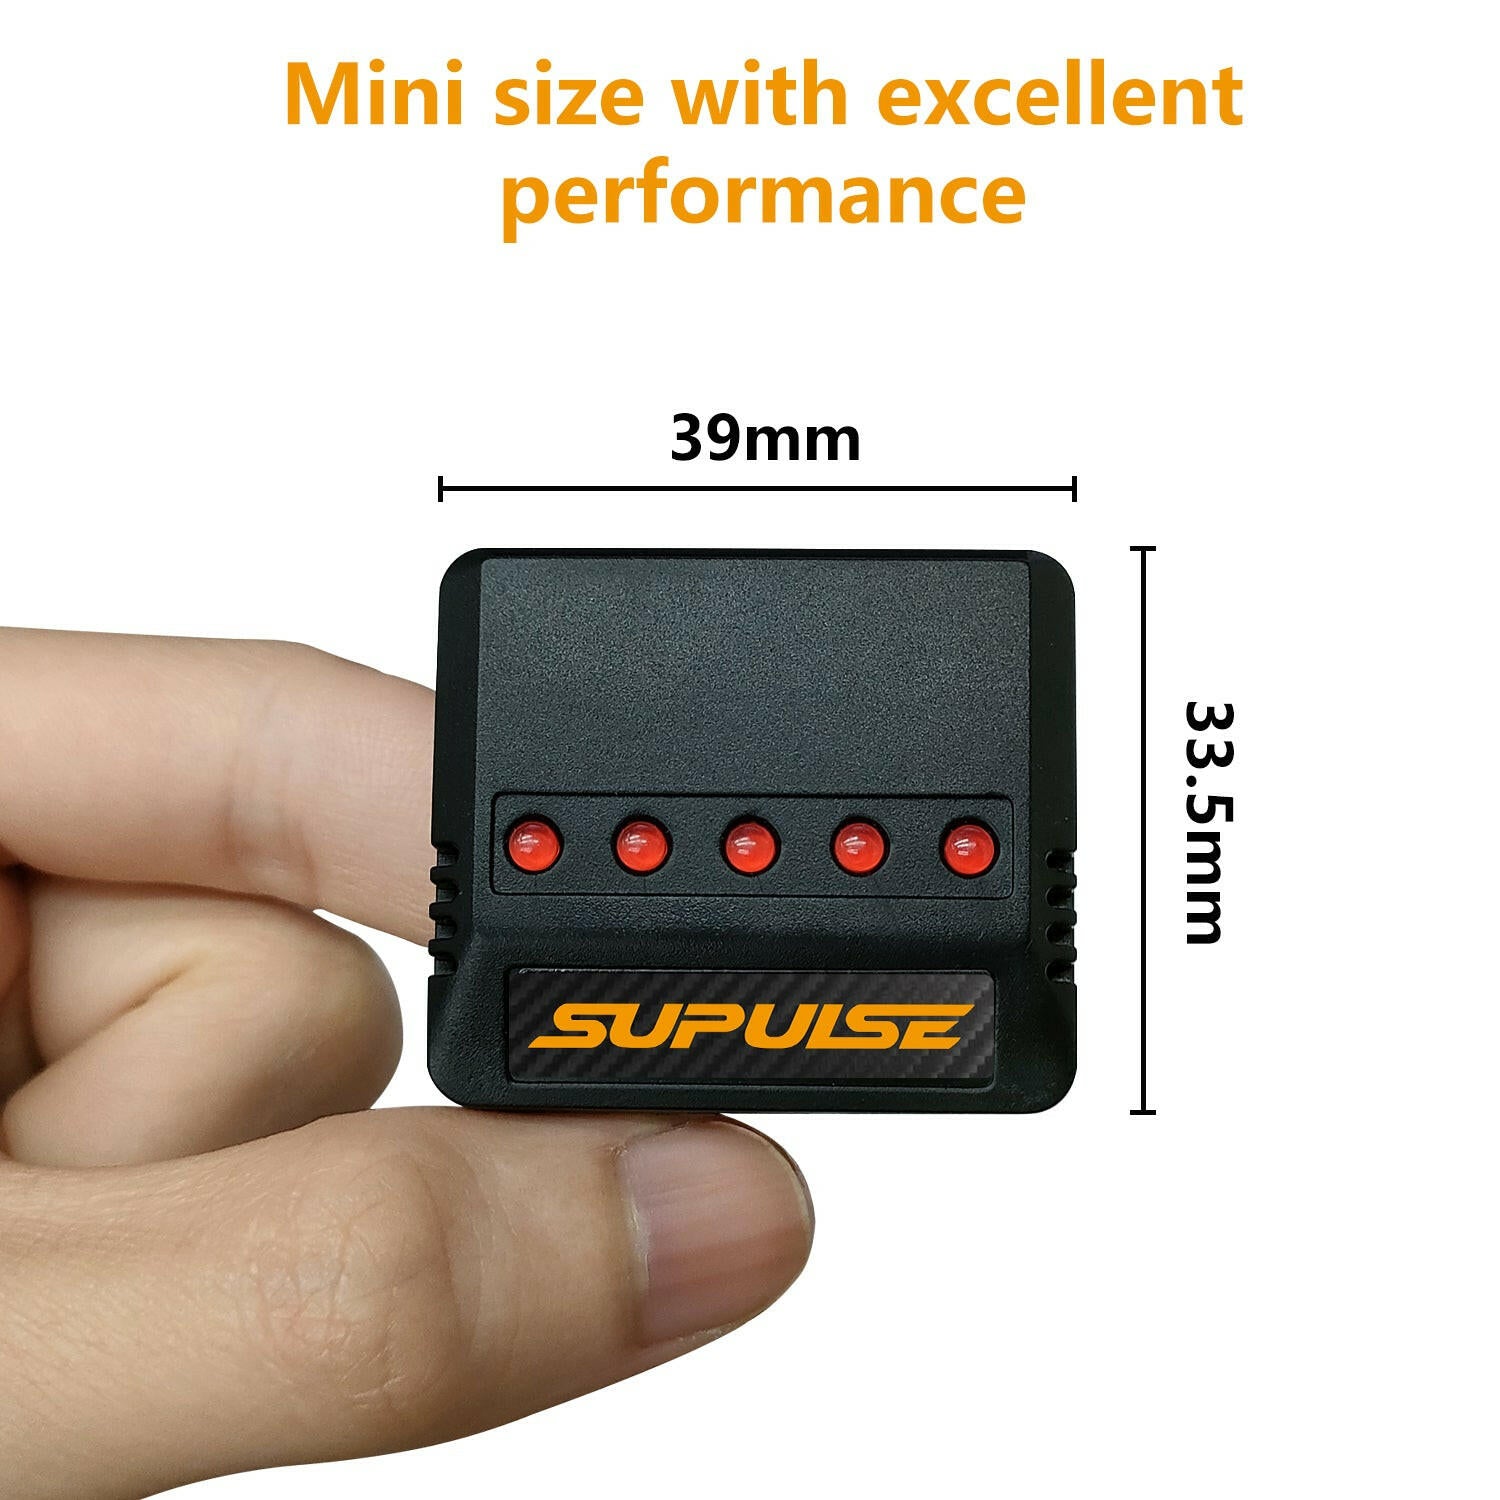 SUPULSE 5-in-1 Lipo Battery Charger 3.7V 1S 1 Cell Micro 5 Ports Compact Charger - EXHOBBY